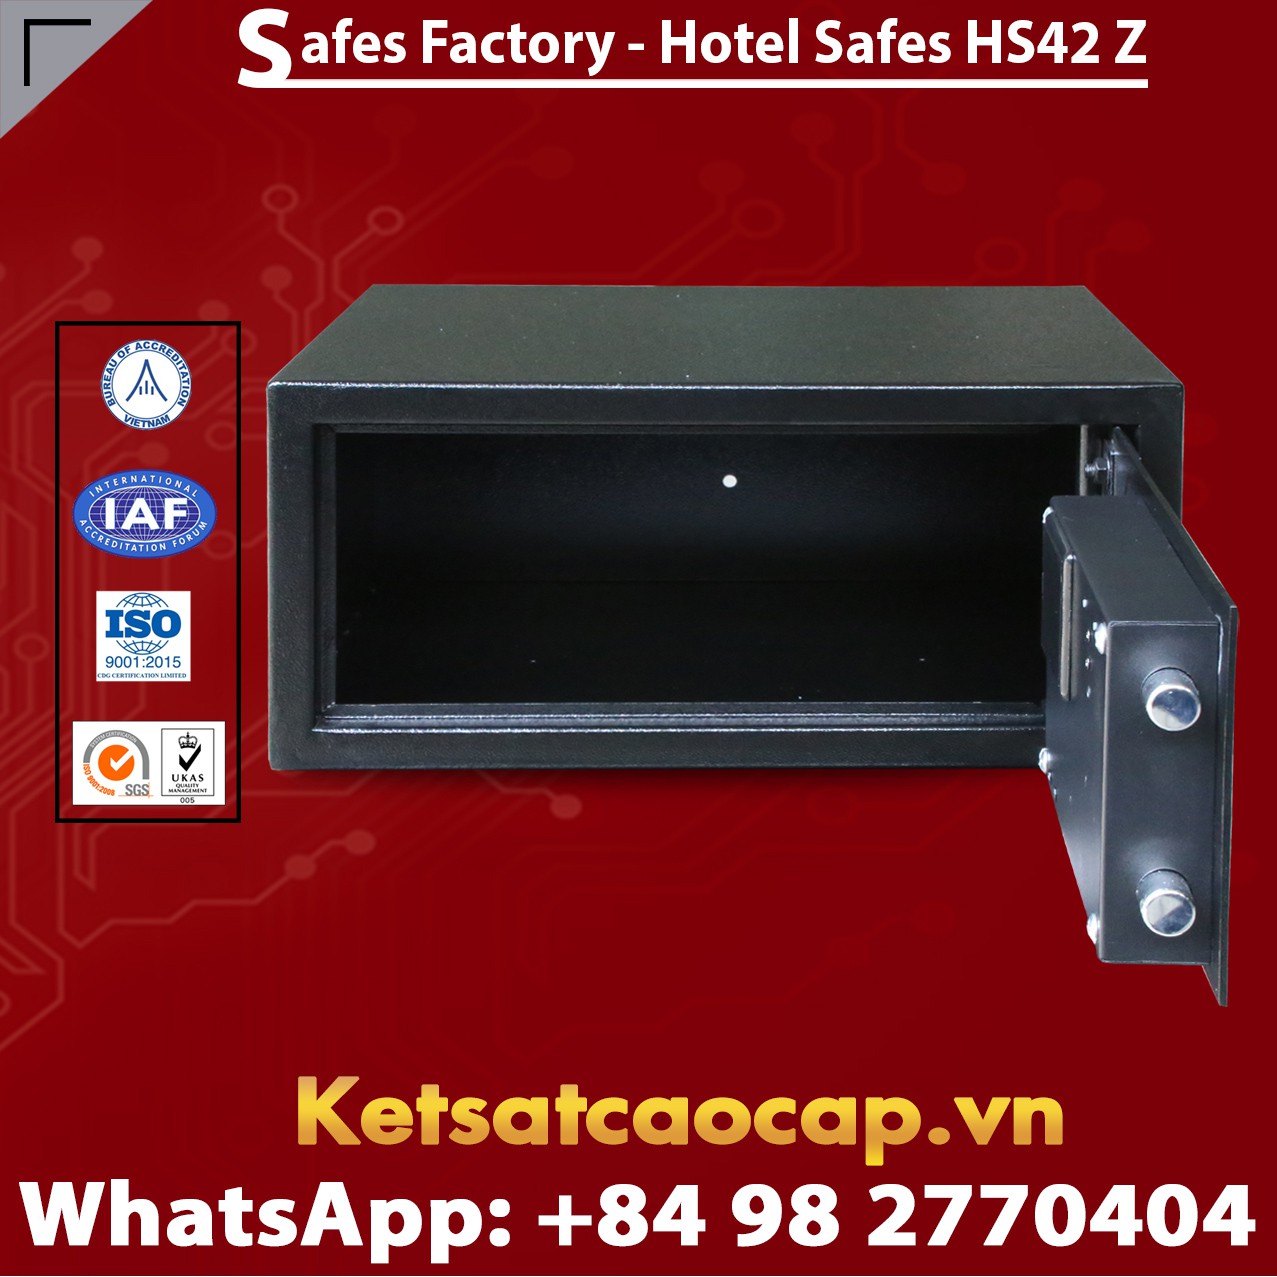 Hotel Safes High Quality Factory Price uy tín